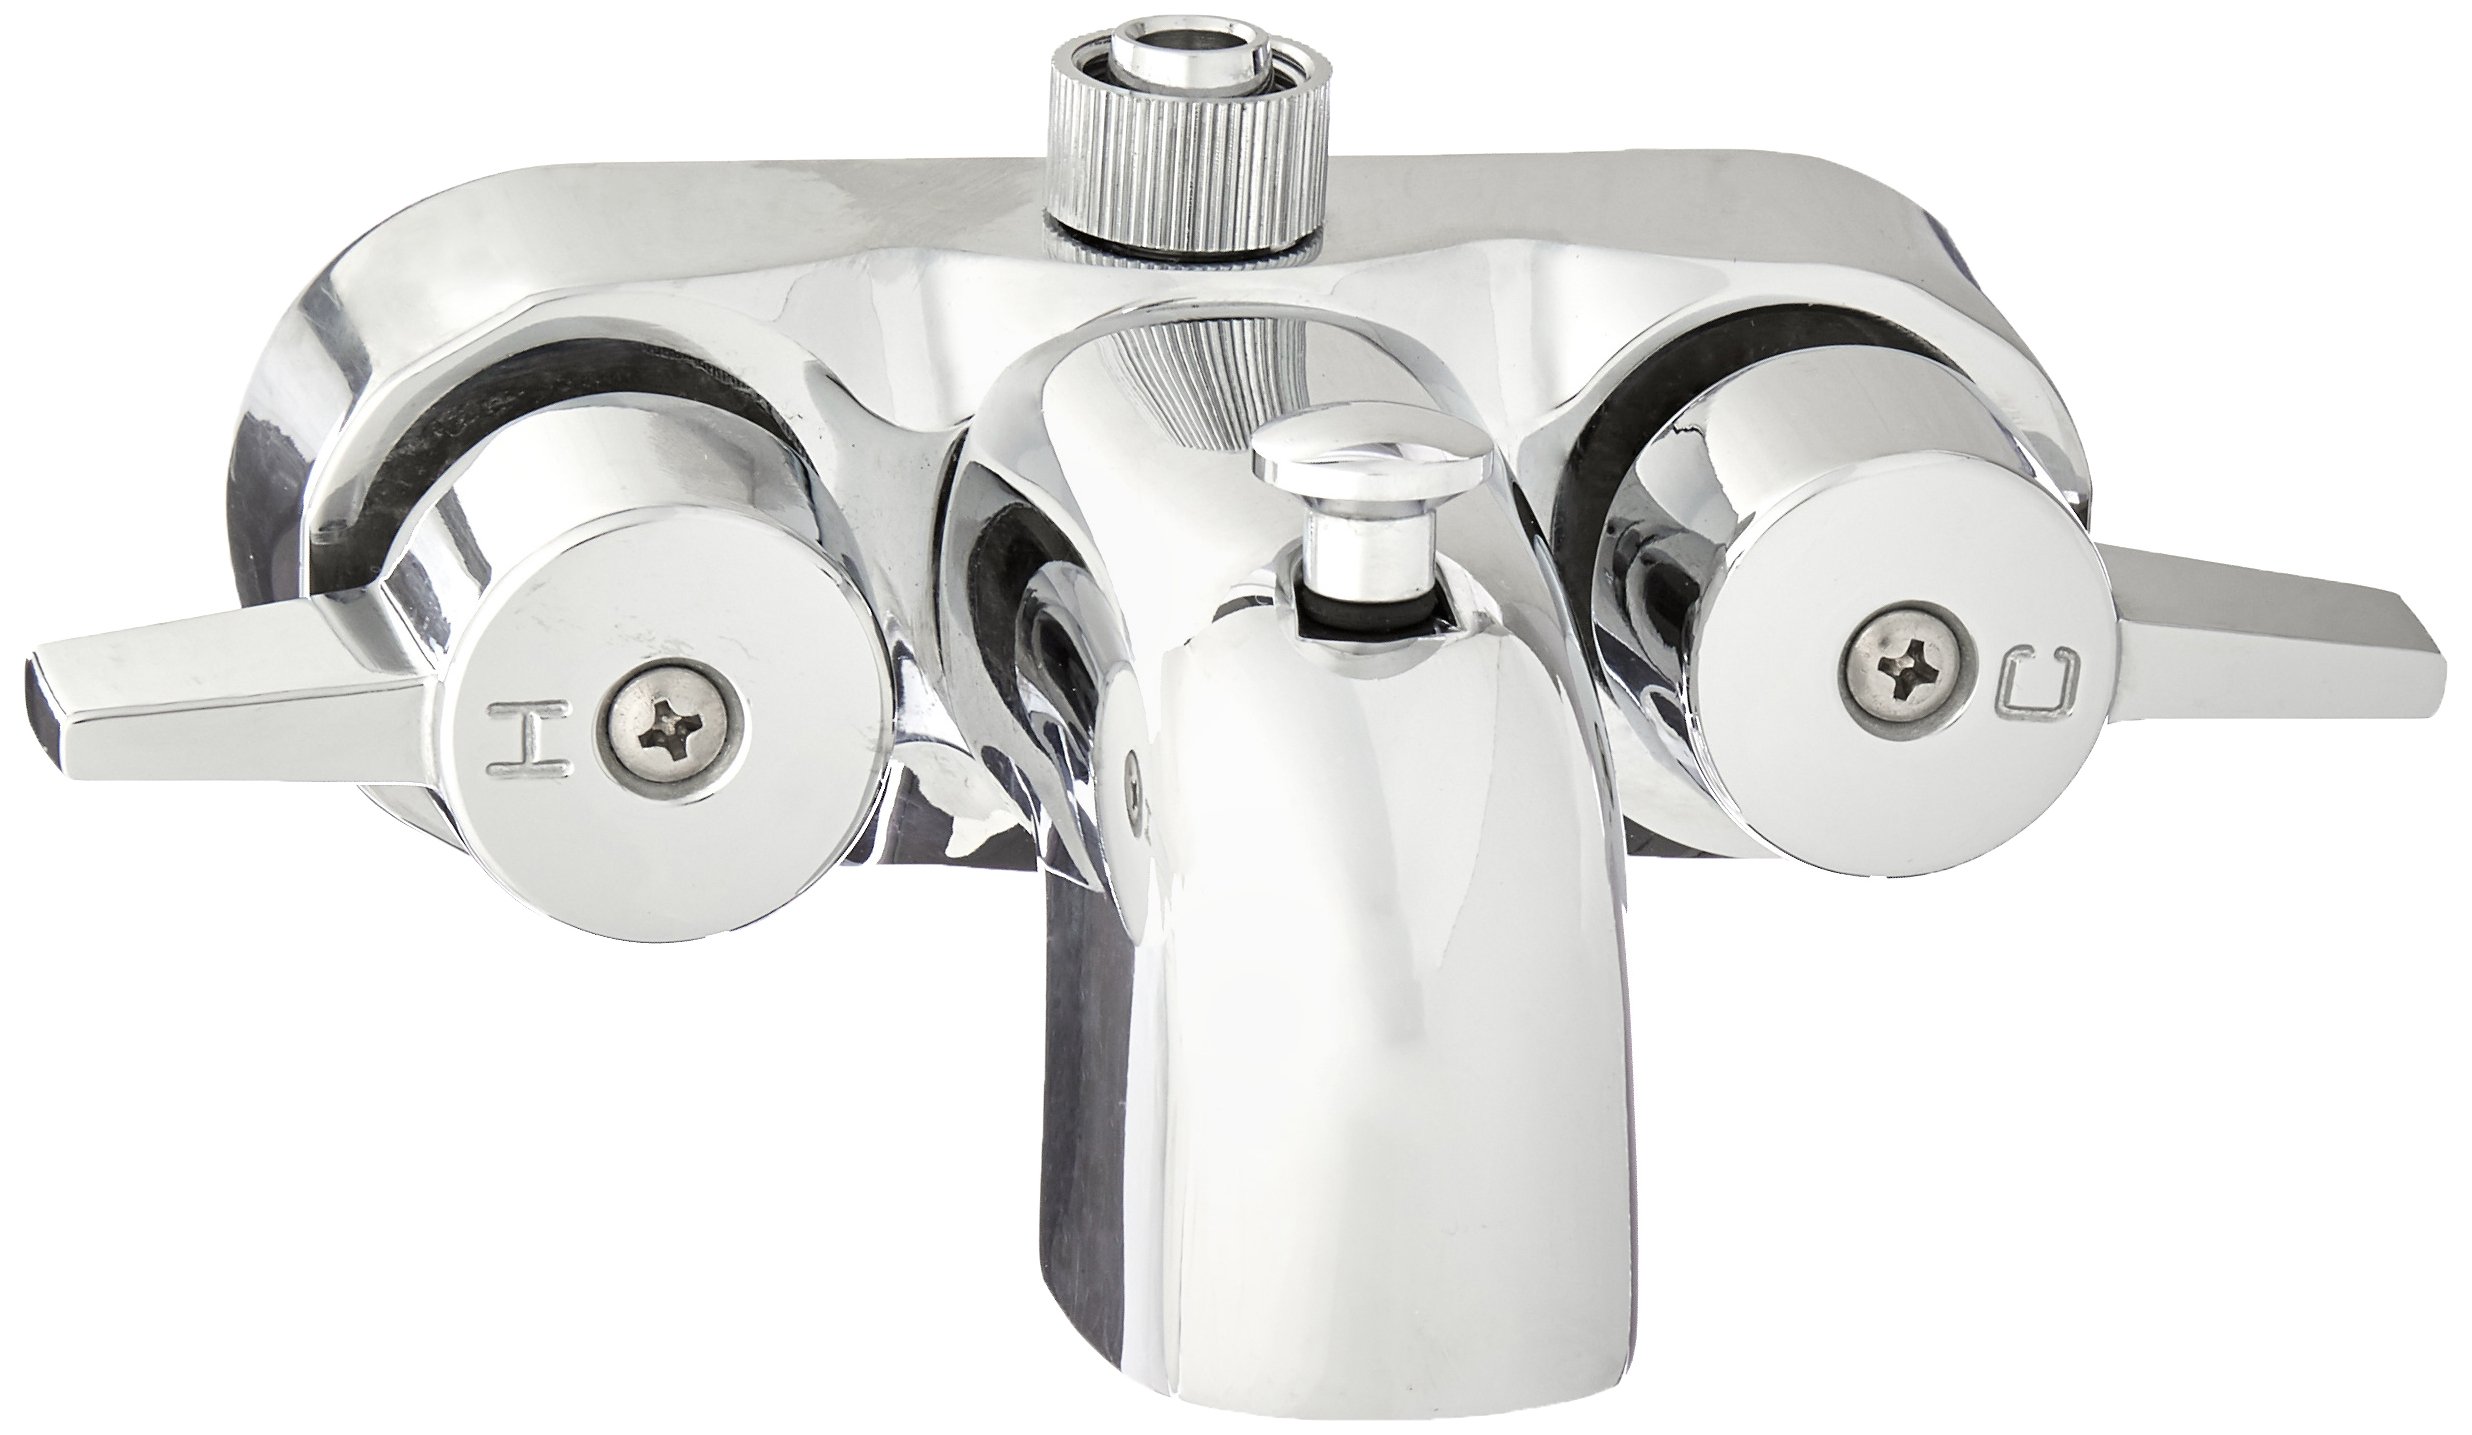 ProPlus Heavy Duty Diverter Clawfoot Tub Faucet